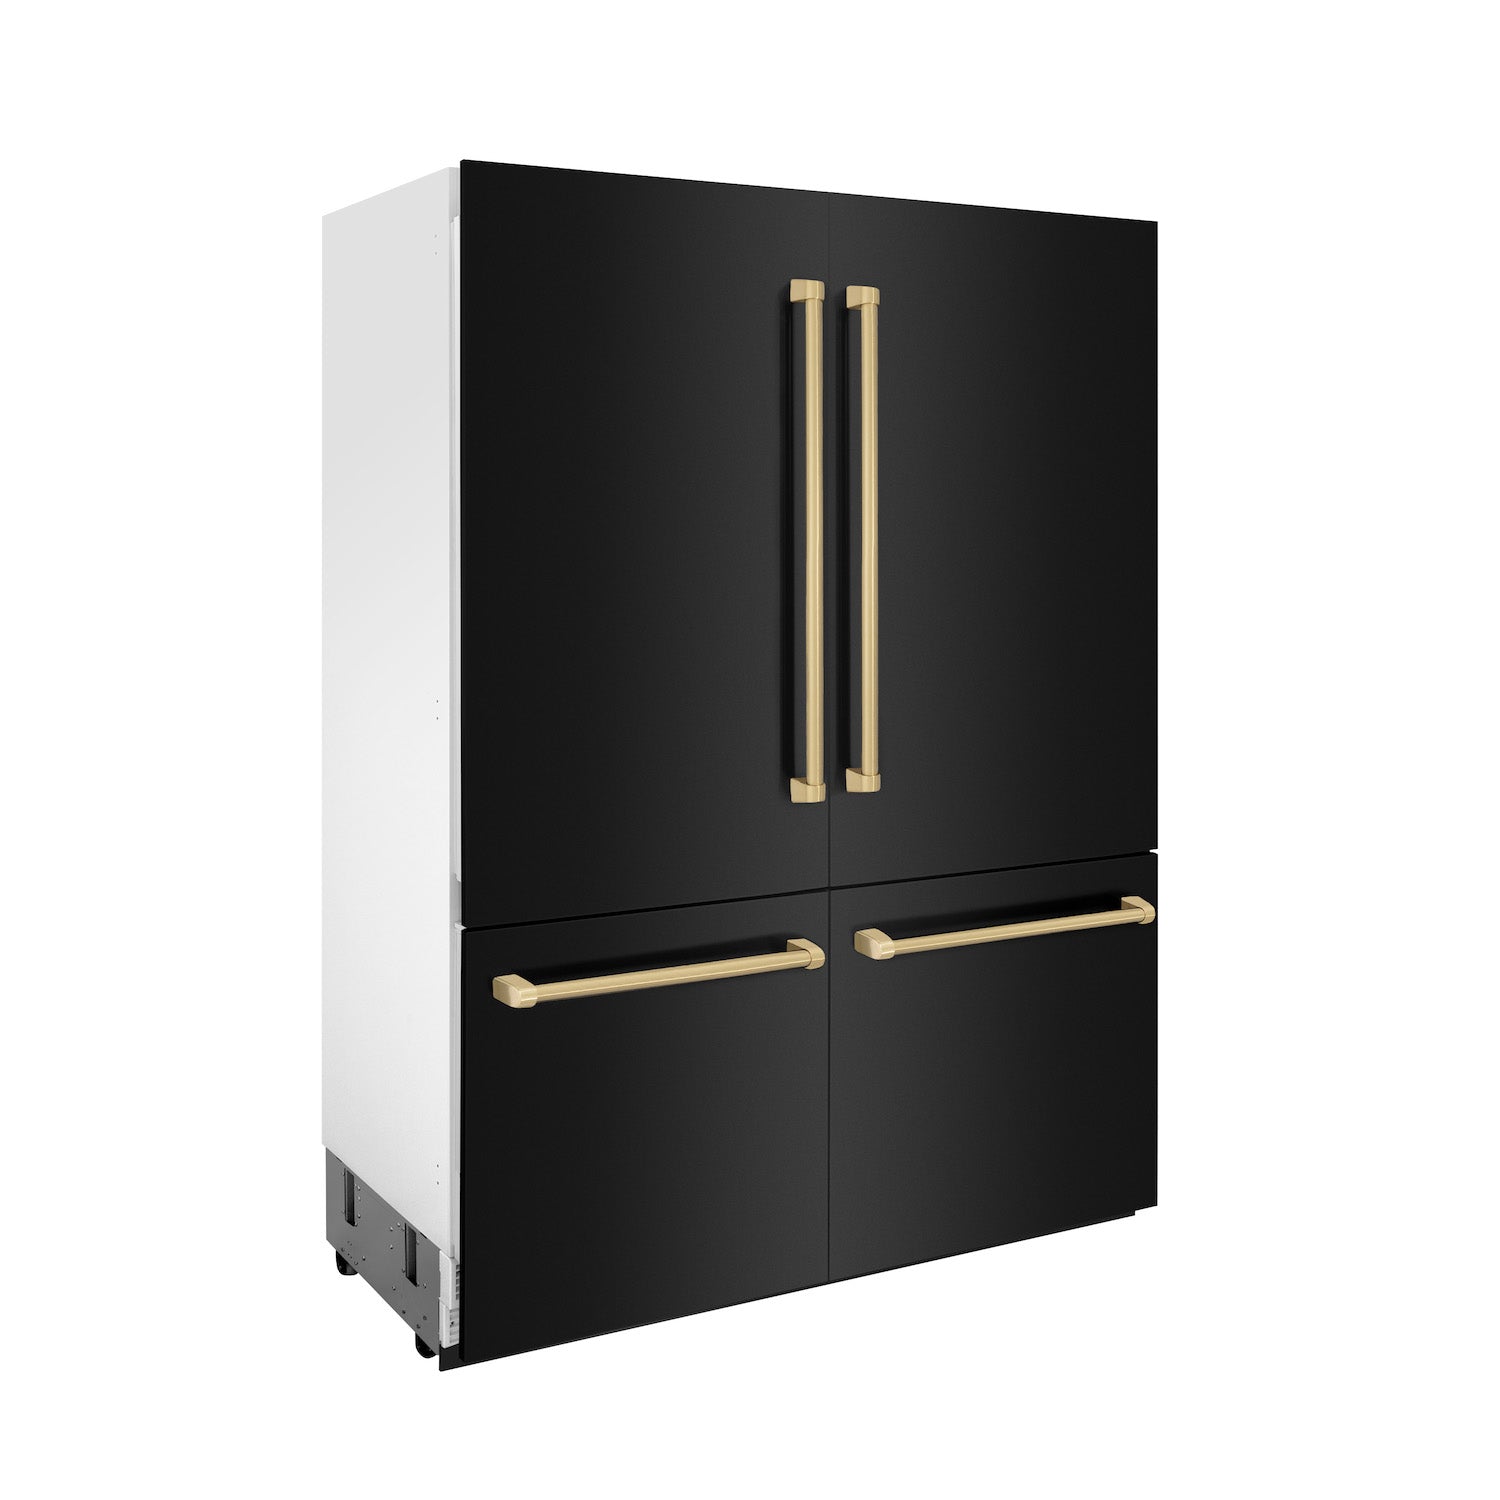 ZLINE Autograph Edition 60 in. 32.2 cu. ft. Built-in 4-Door French Door Refrigerator with Internal Water and Ice Dispenser in Black Stainless Steel with Champagne Bronze Accents (RBIVZ-BS-60-CB) side.